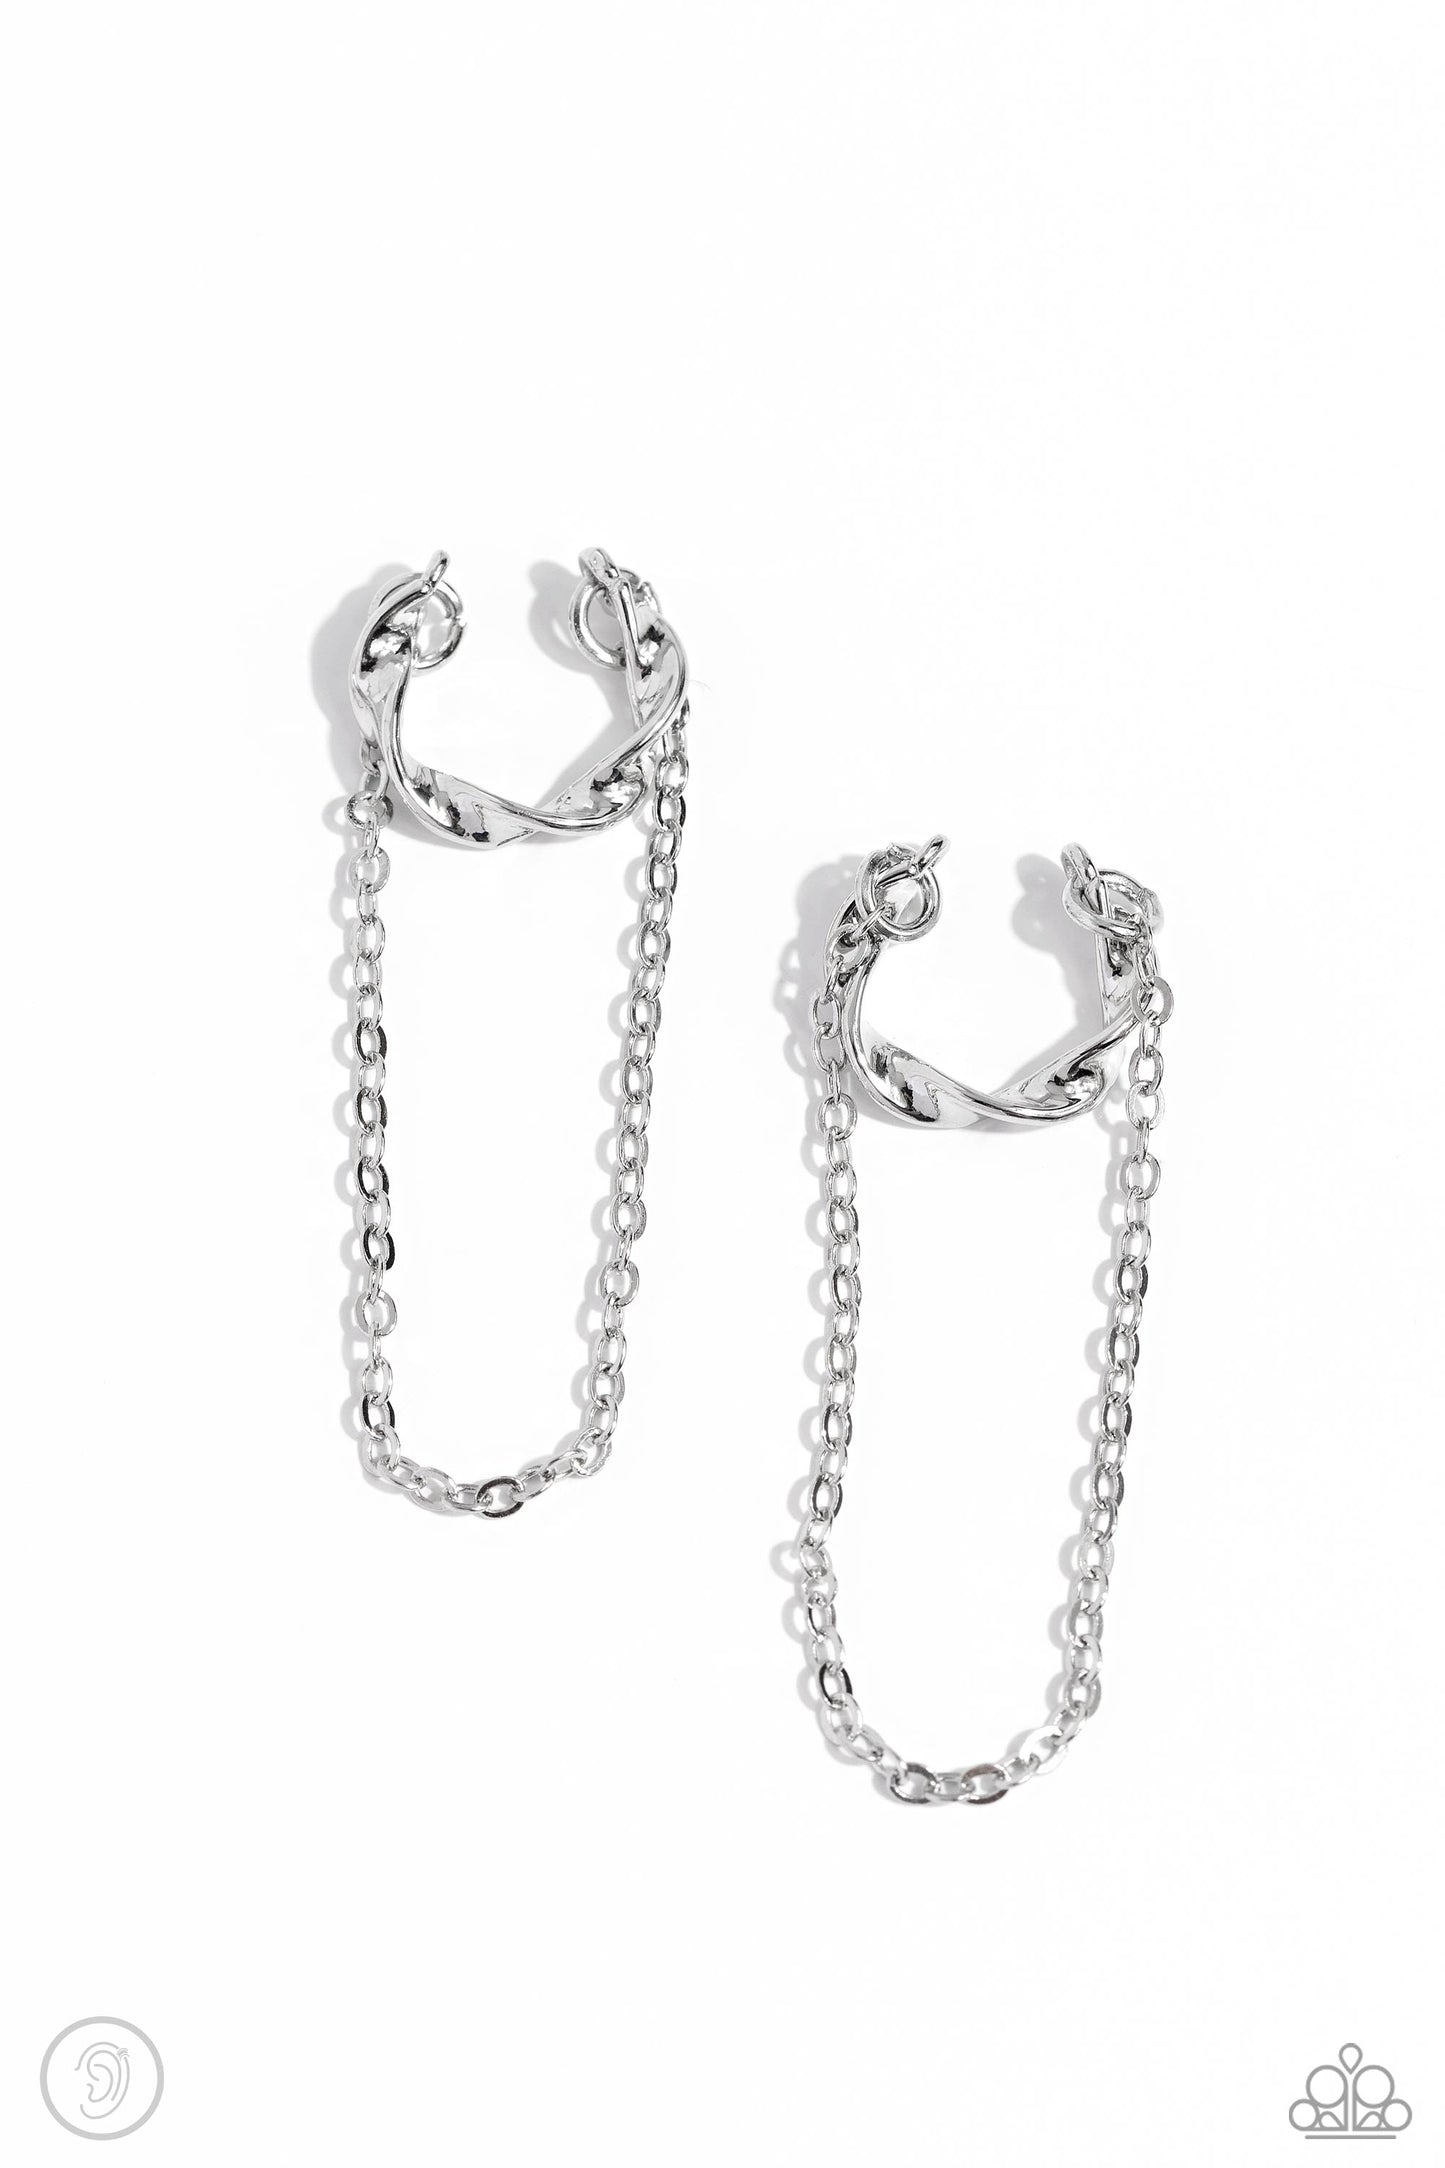 CUFF Hanger Silver Ear Cuff - Paparazzi Accessories  A glistening silver bar delicately twists into a dainty hoop while a solitaire shimmery silver chain cascades below it, creating an adjustable refined, one-size-fits-all display.  Sold as one pair of cuff earrings.  Sku:  P5PO-CFSV-257XX